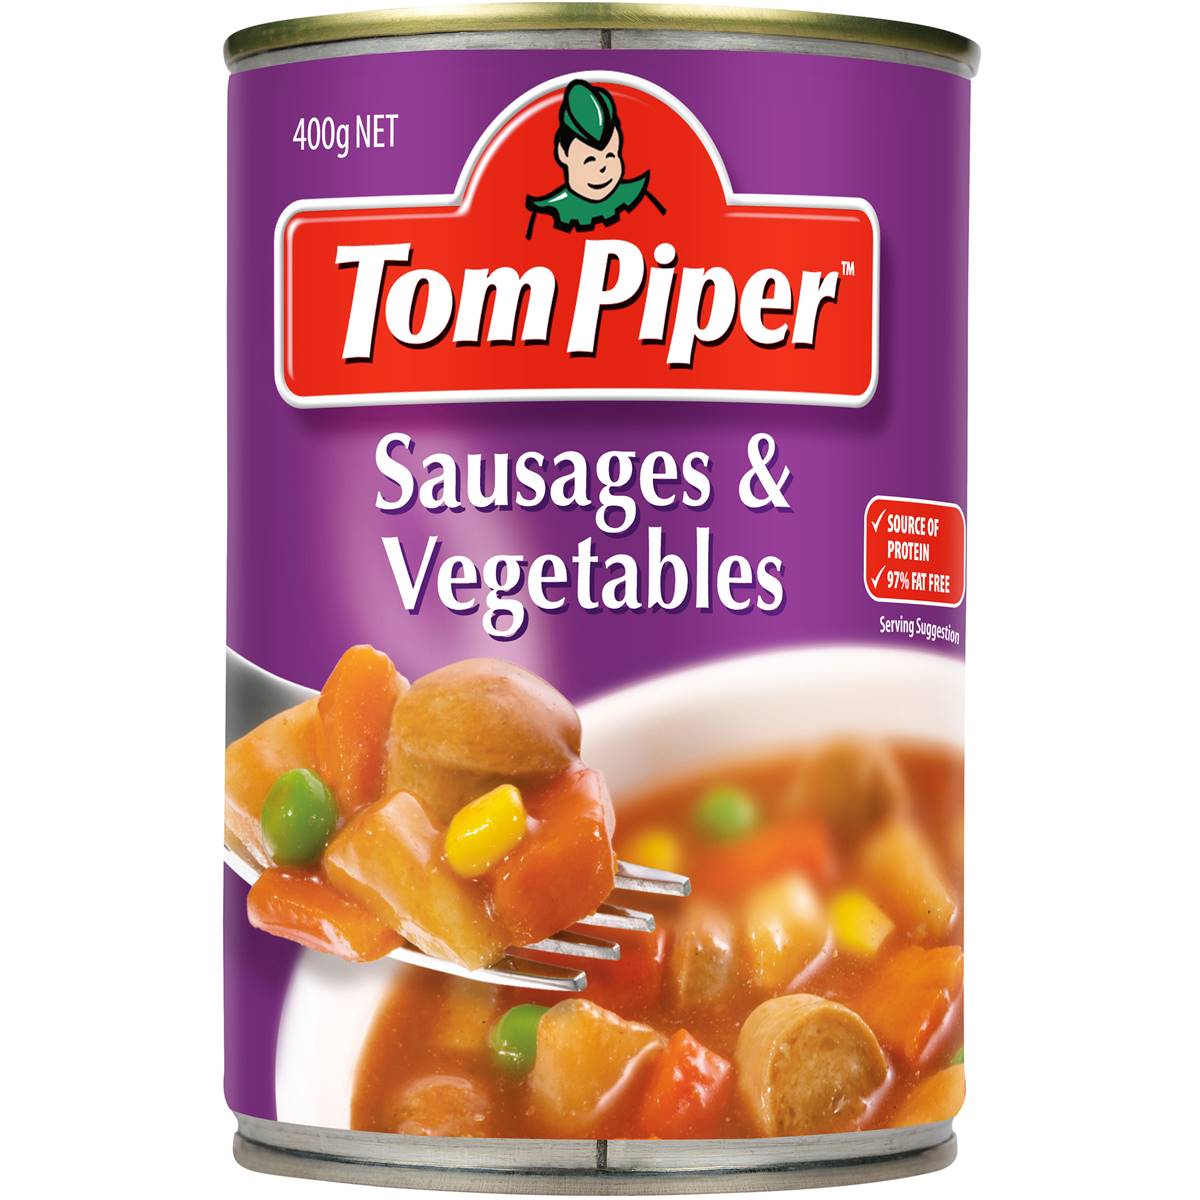 Calories in Tom Piper Sausages And Vegetables Canned Meal